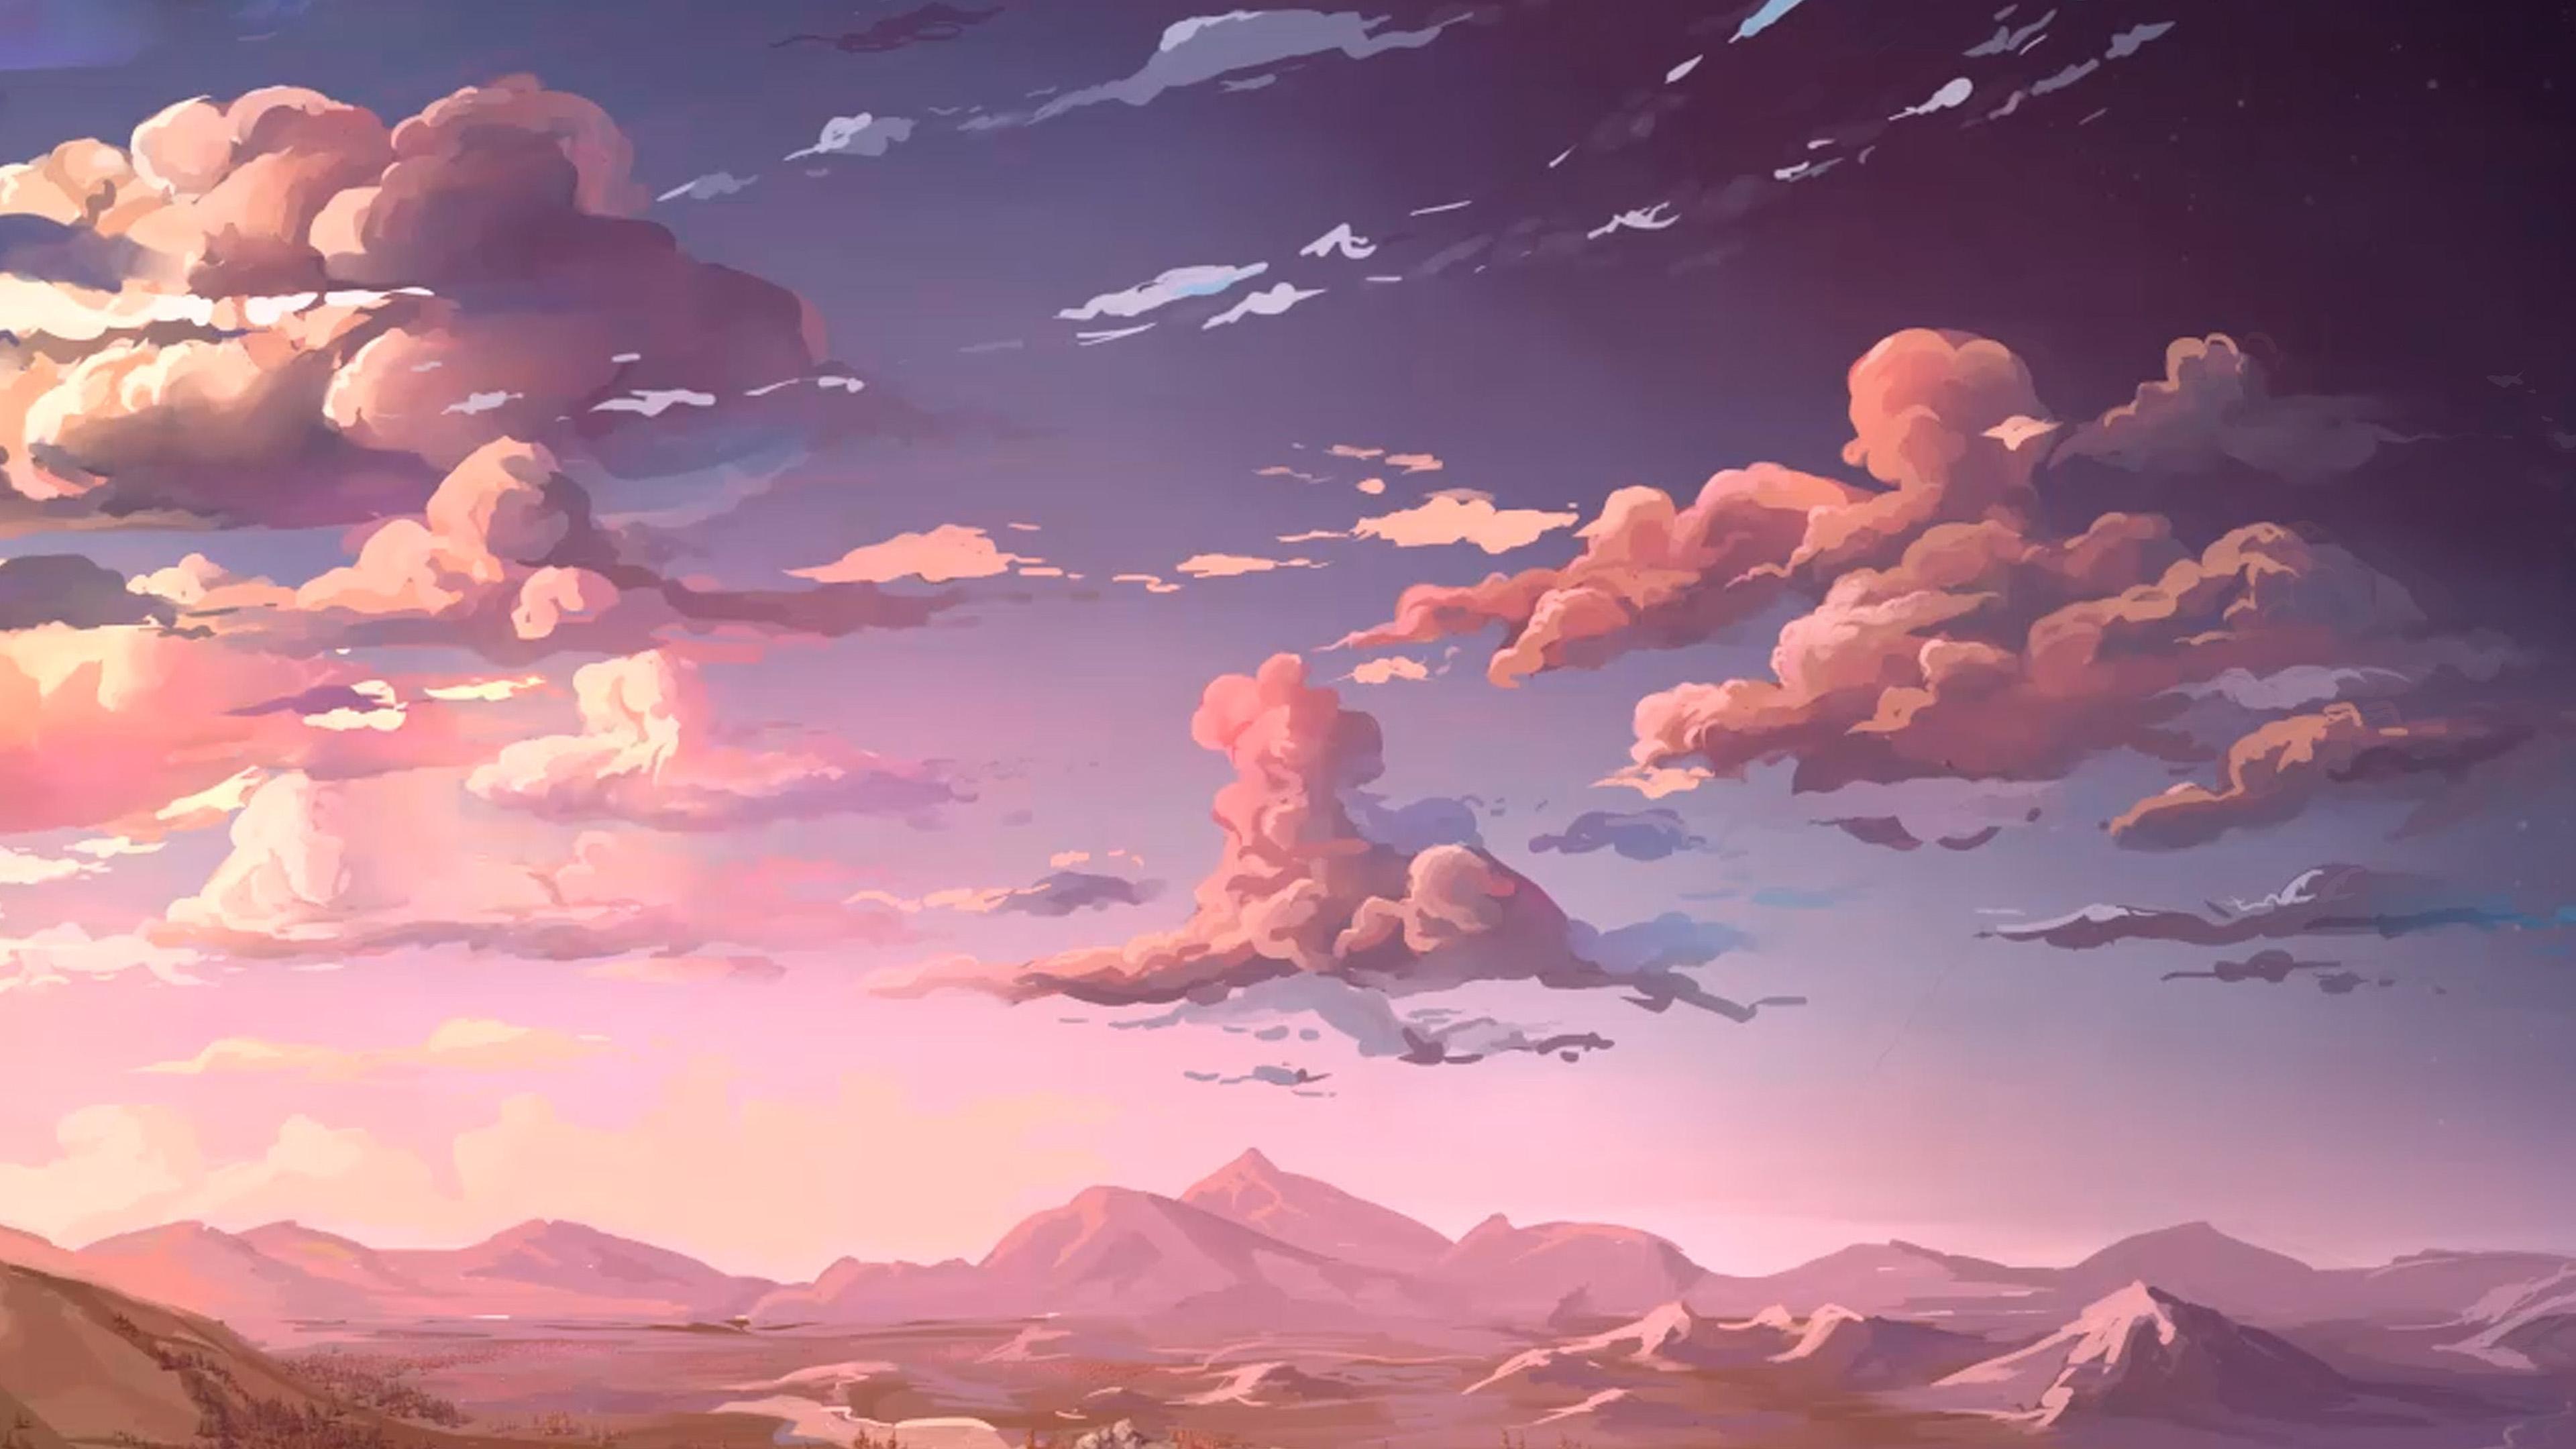 A landscape with clouds and mountains in the background - MacBook, 90s, 3840x2160, 90s anime, pink anime